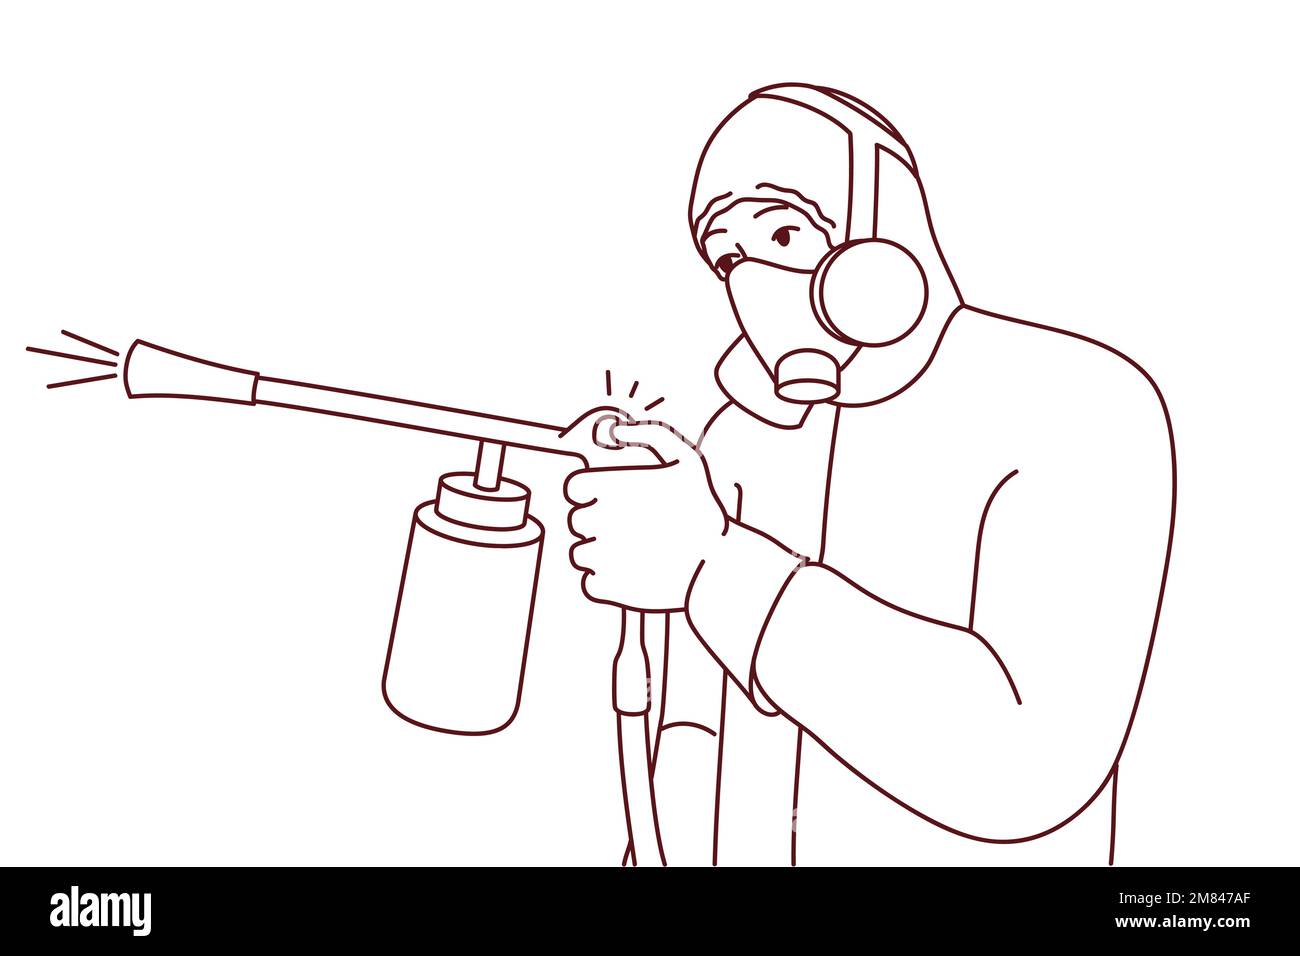 Man in protective uniform spraying pesticide to kill insects and rodents. Male exterminator or pest control worker in suit doing disinfection. Vector illustration.  Stock Vector